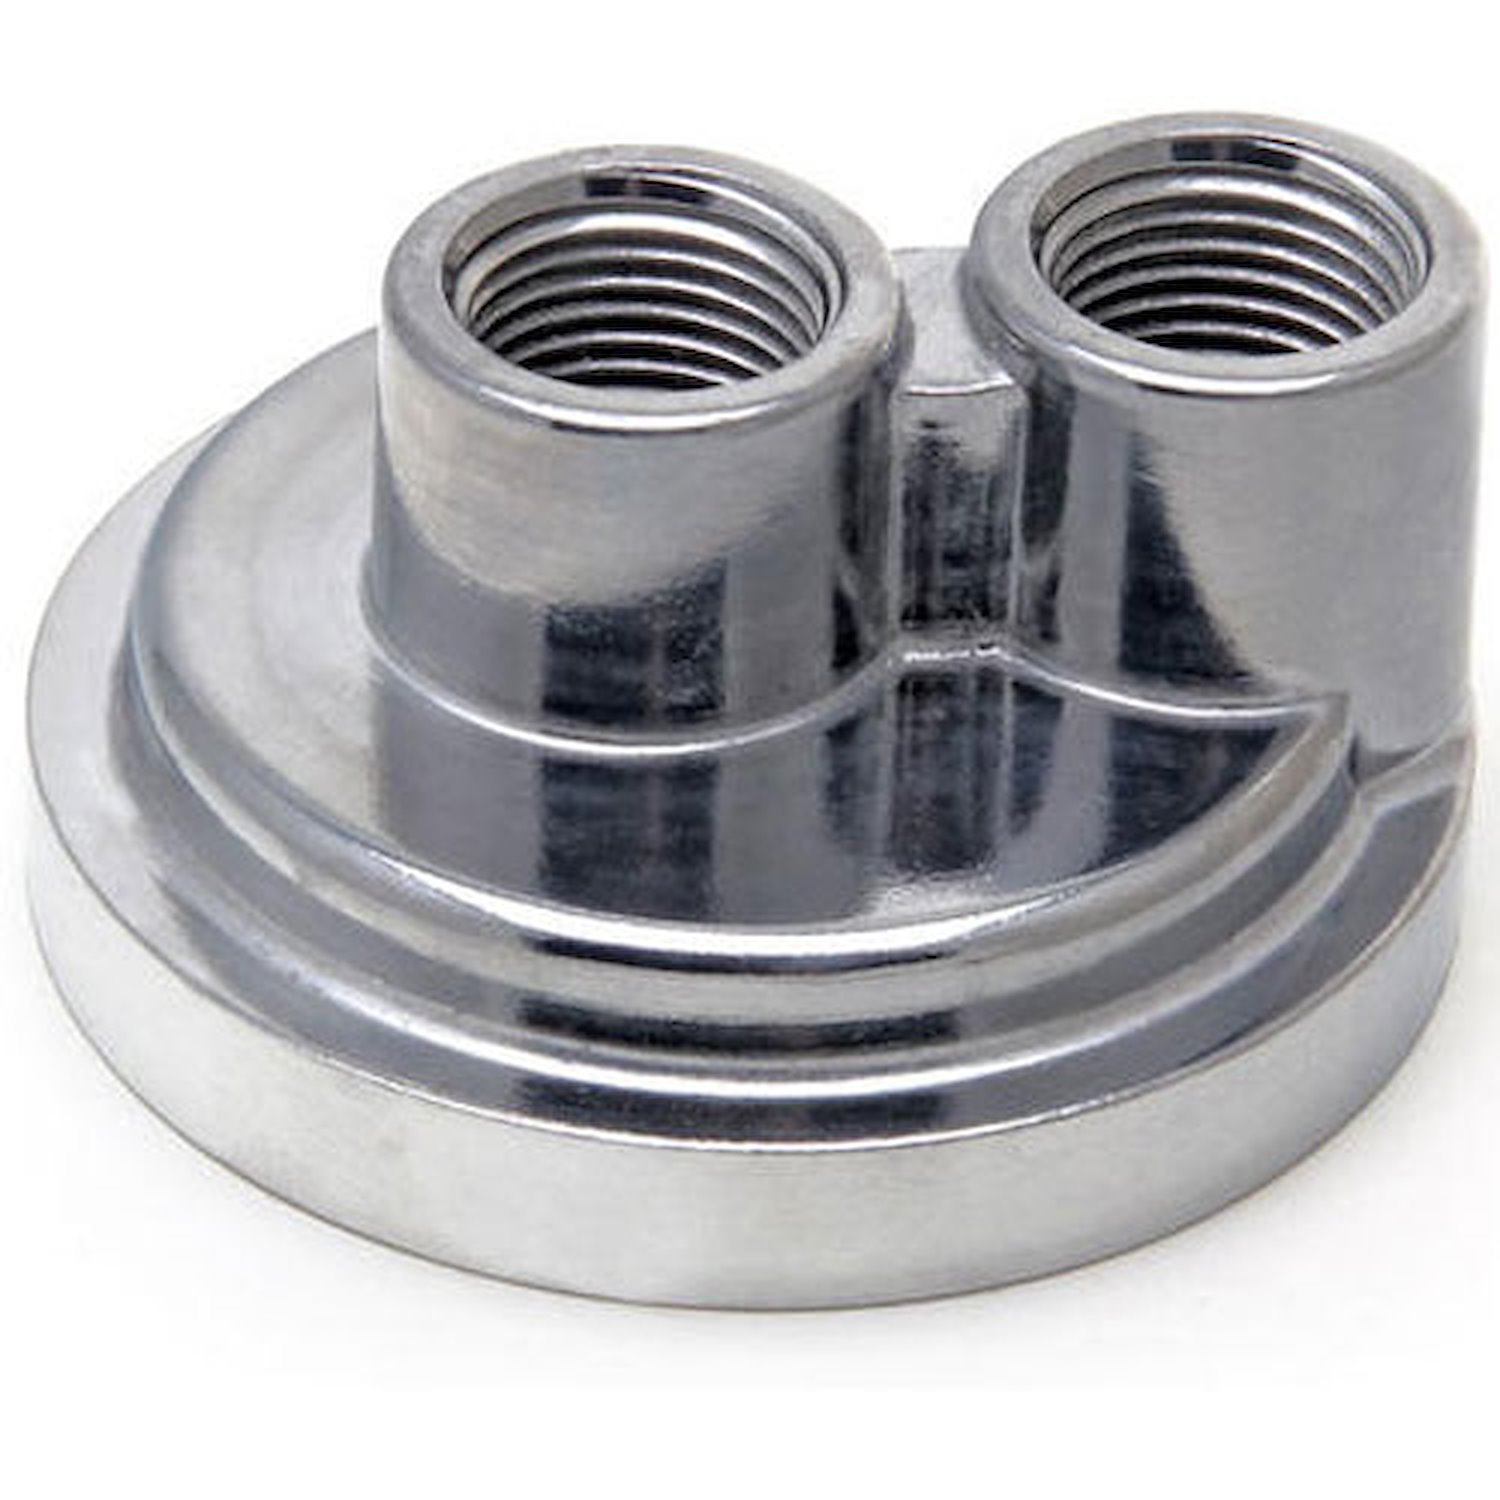 Spin-On Oil Filter Bypass Adapter GM 4 Cylinder/V6 and Imports